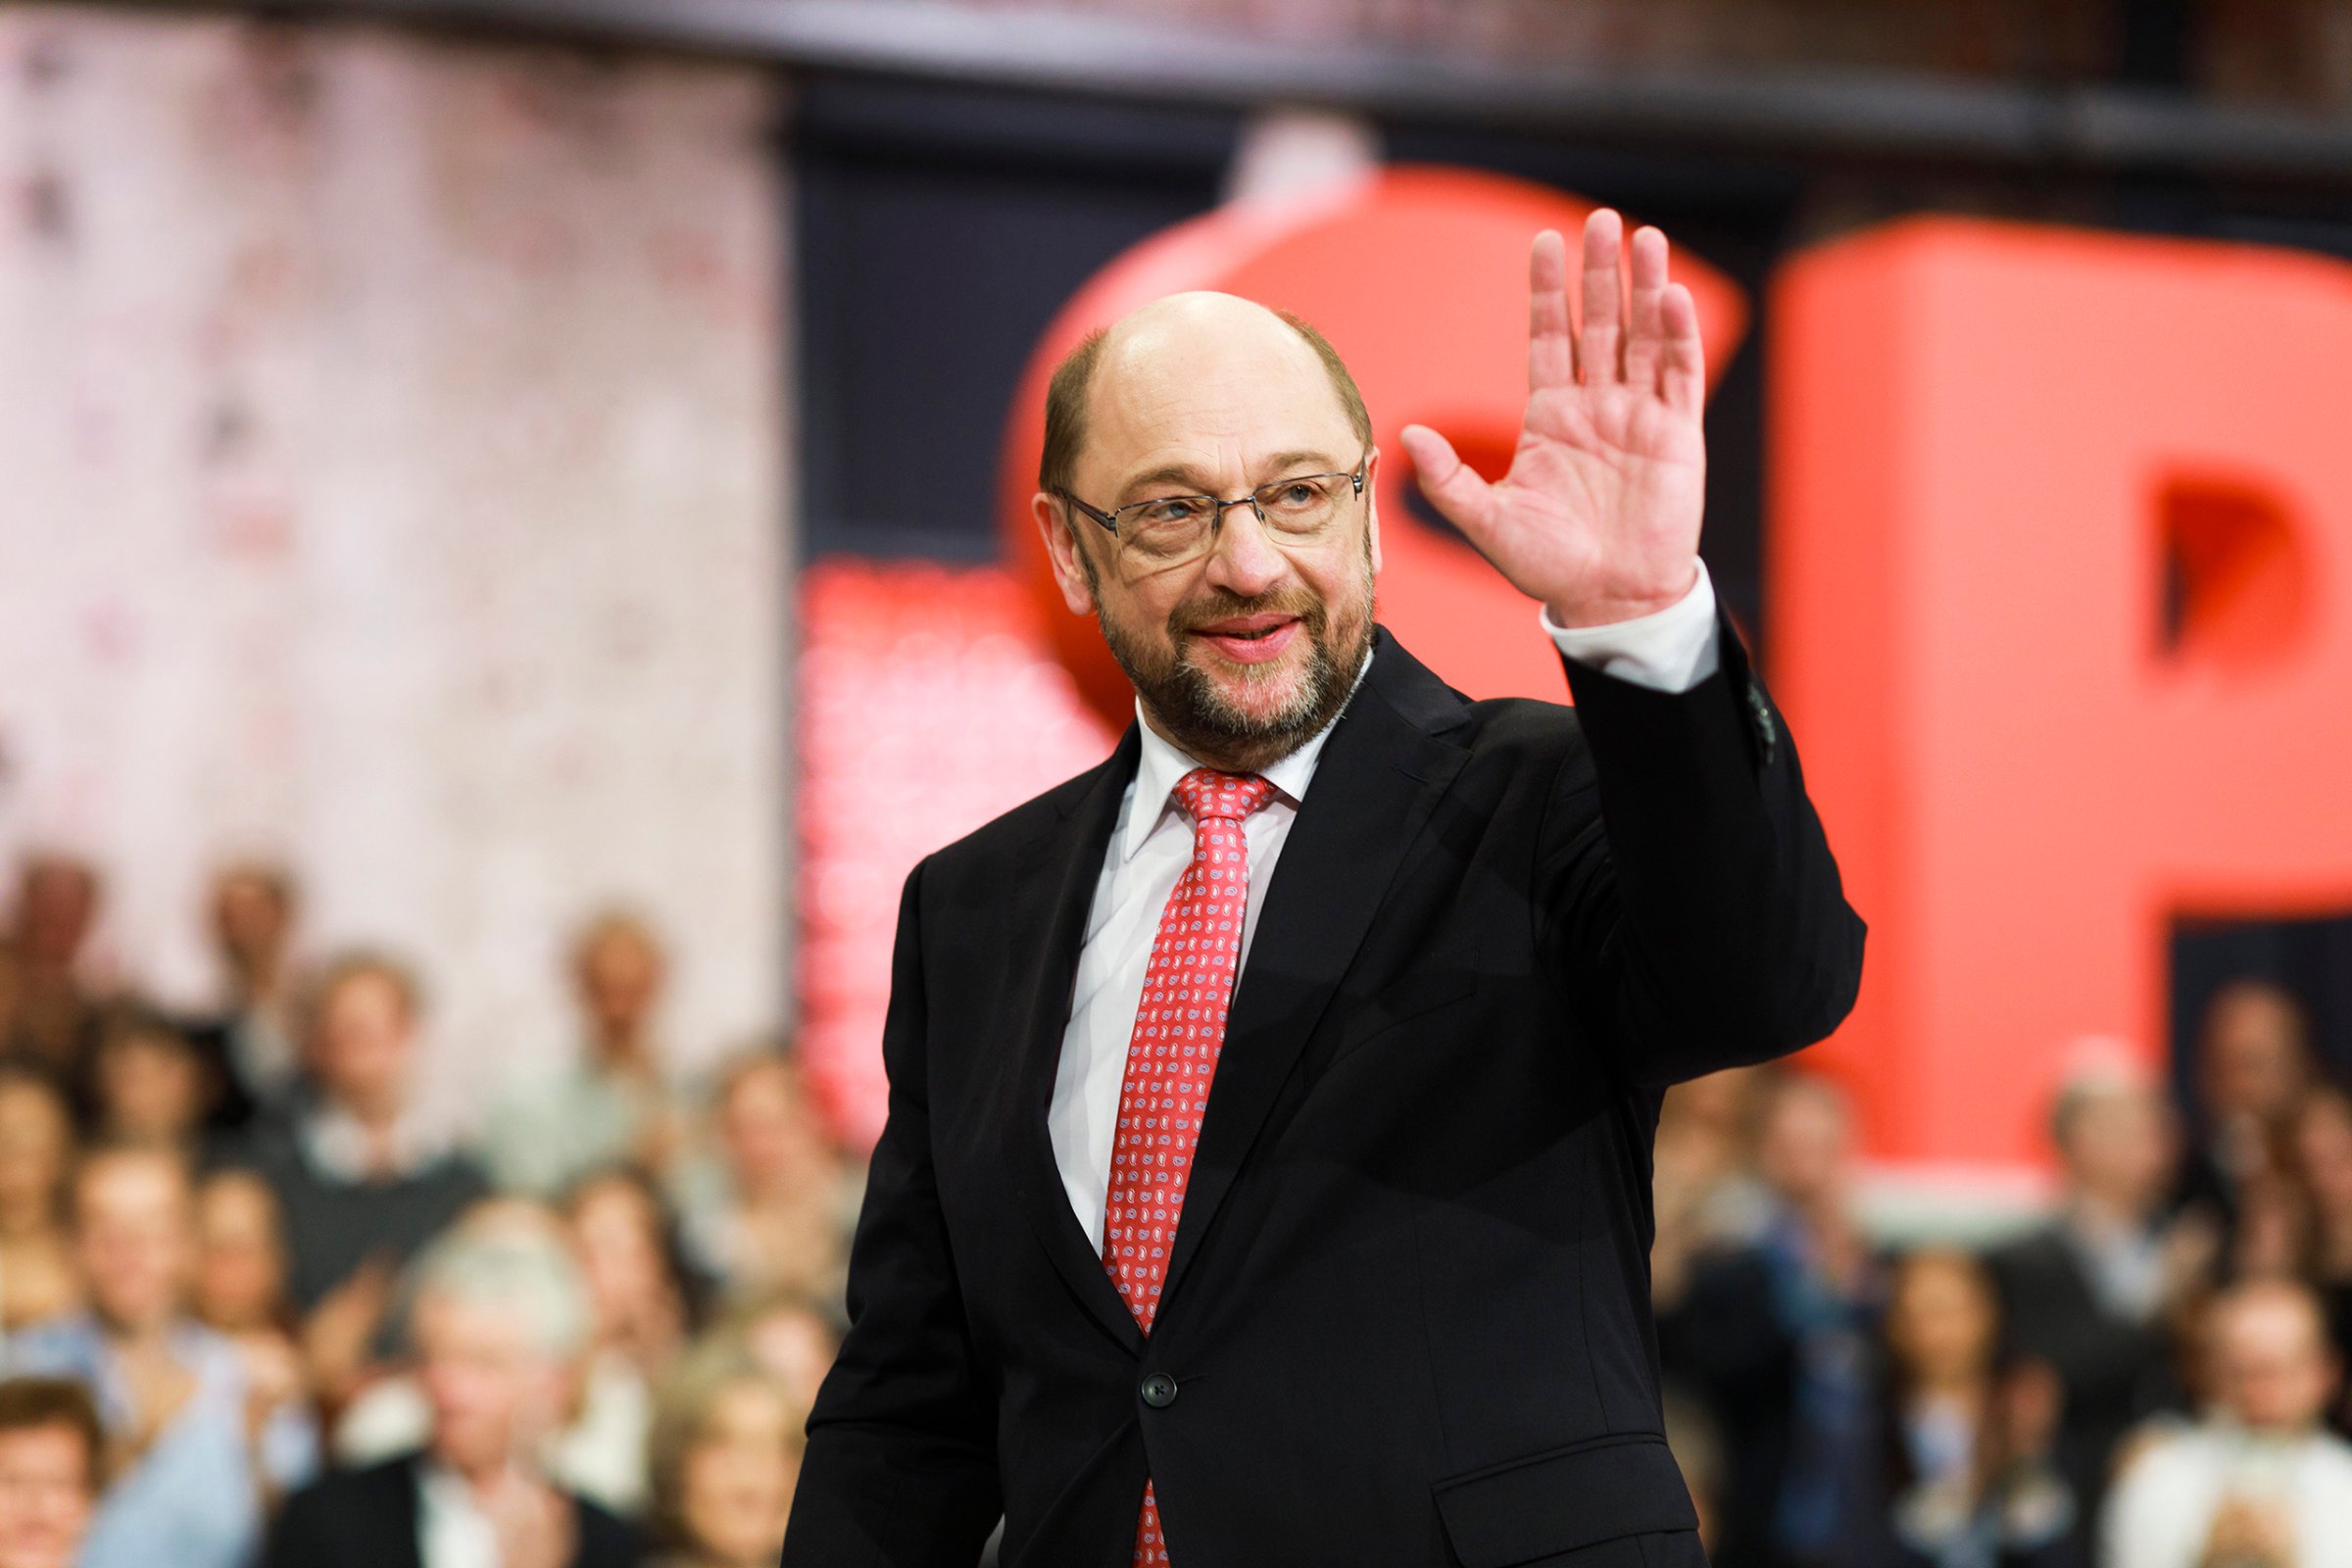 His party’s poll bump and 13,000 new members have been dubbed the “Schulz effect”